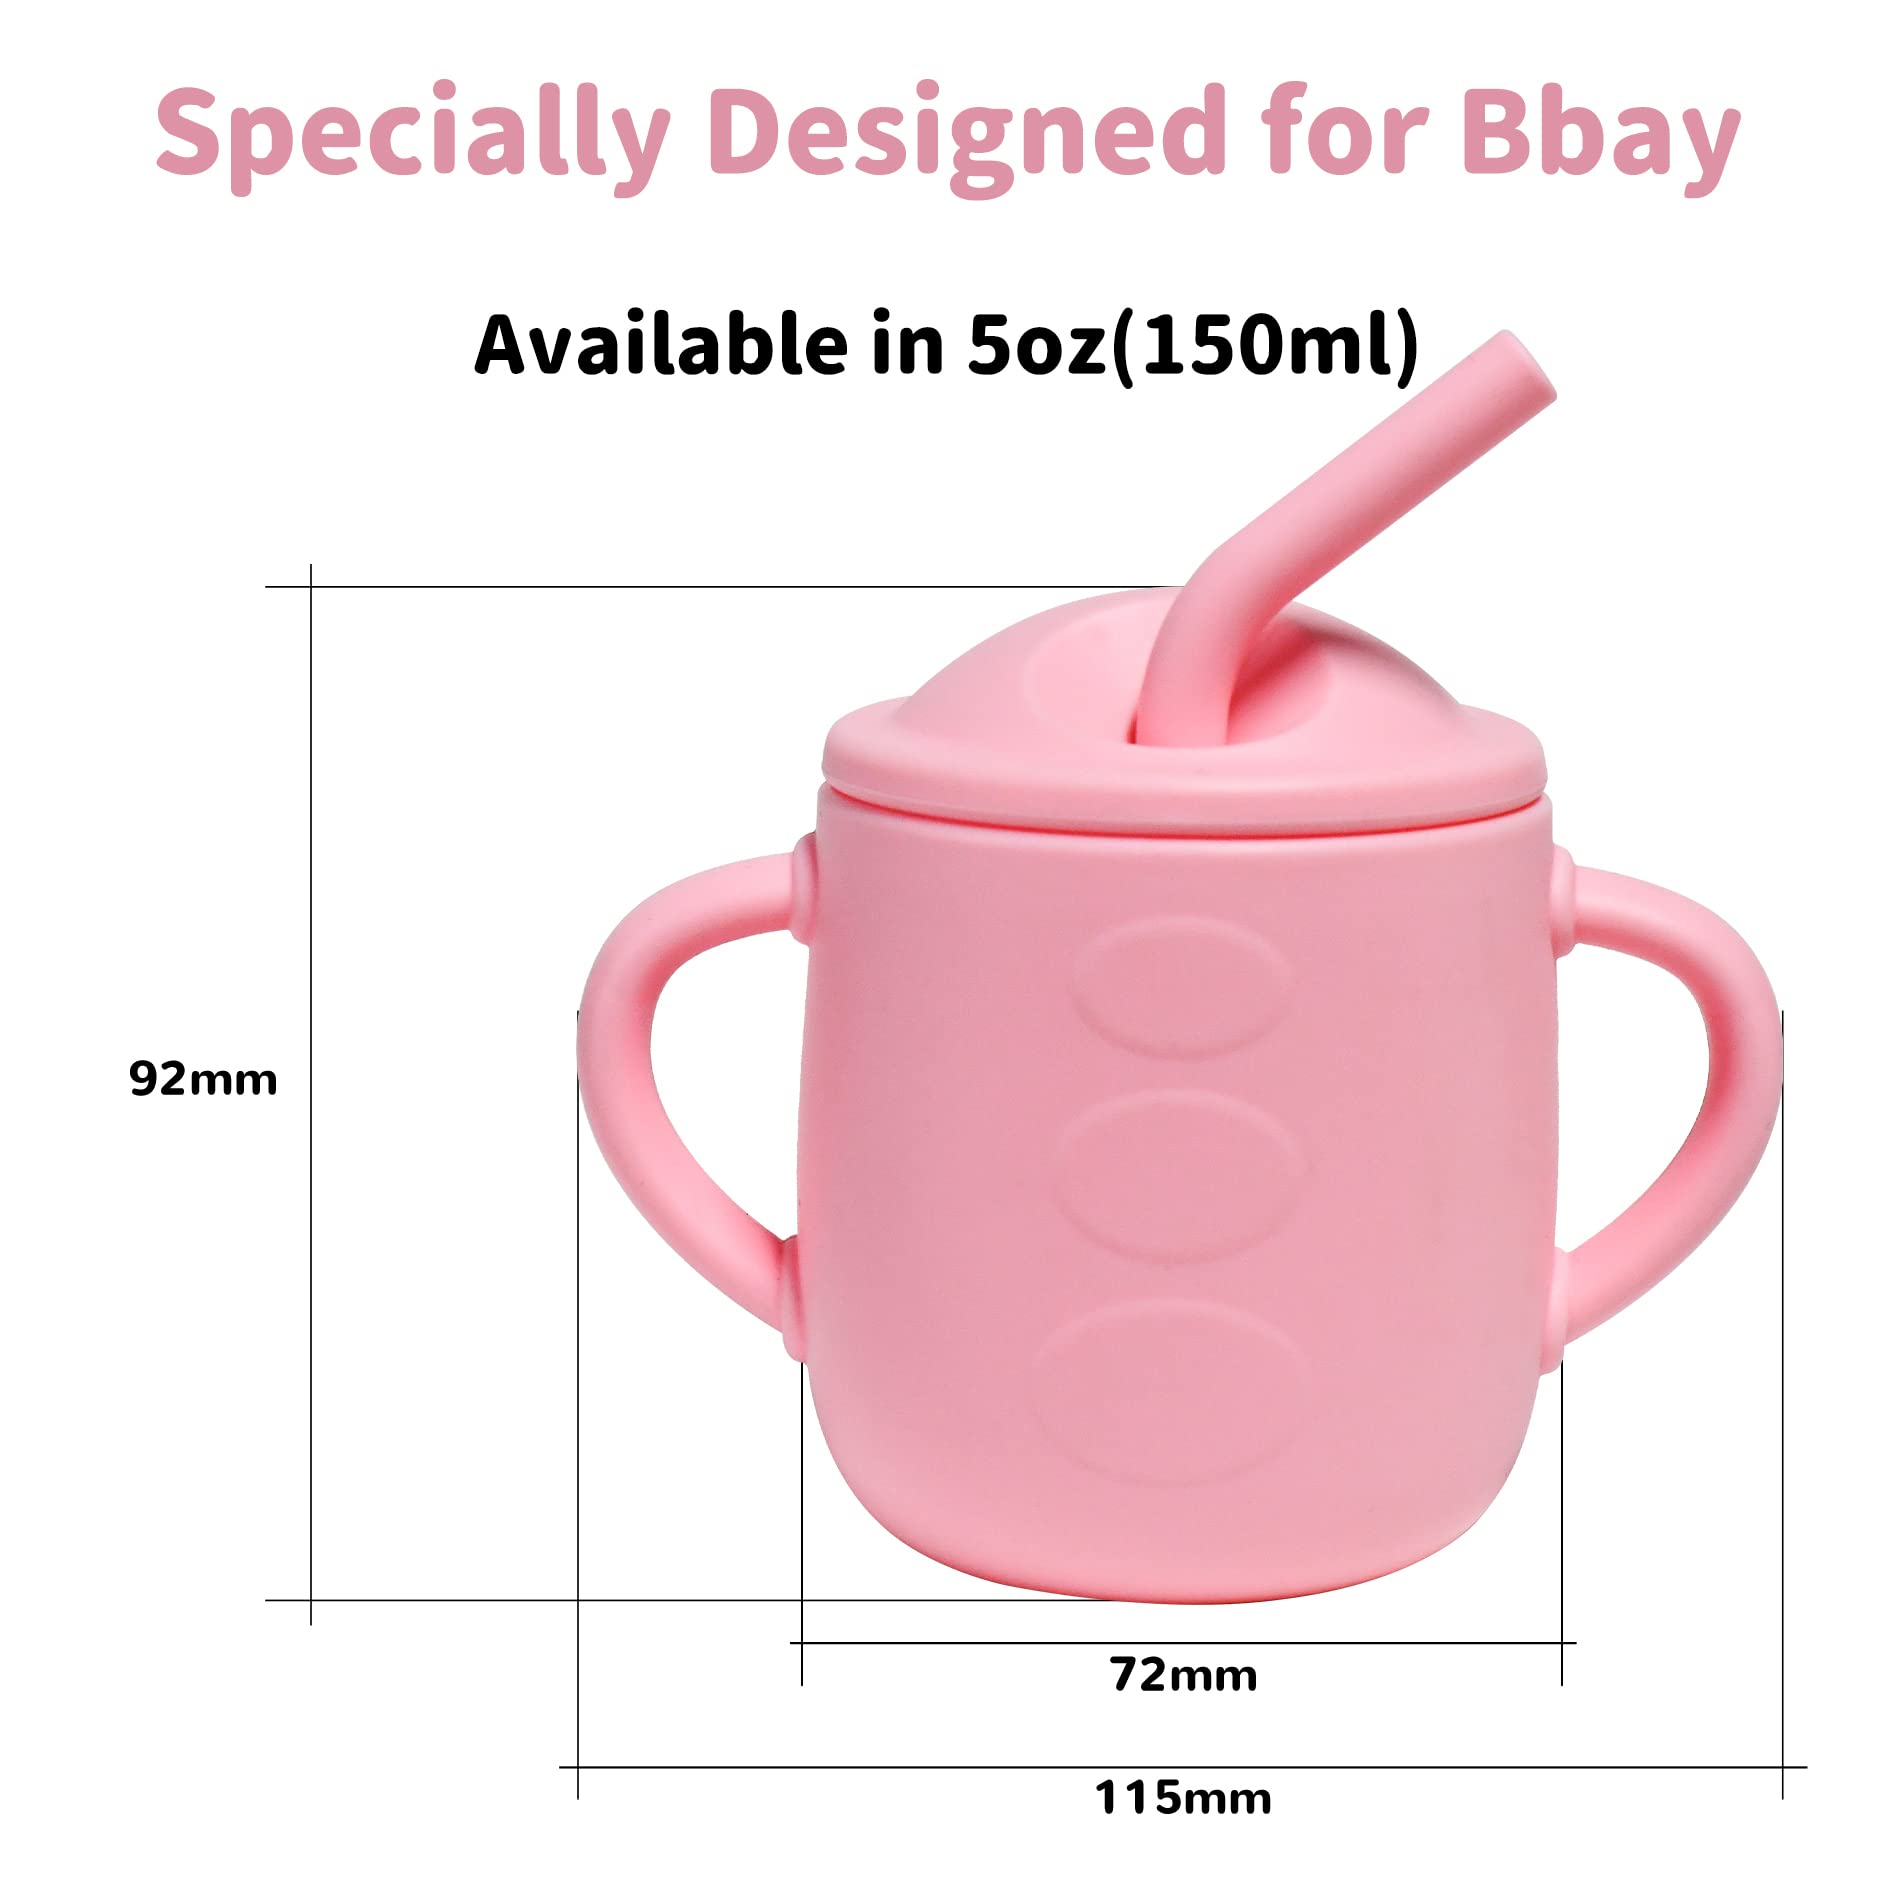 Adocham 100% Silicone Baby Cup With Straw & 2 Handles,Food Grade Toddler Infant Sippy Training Cups Spill Proof,BPA-Free,6 Months+,5oz (Pink)